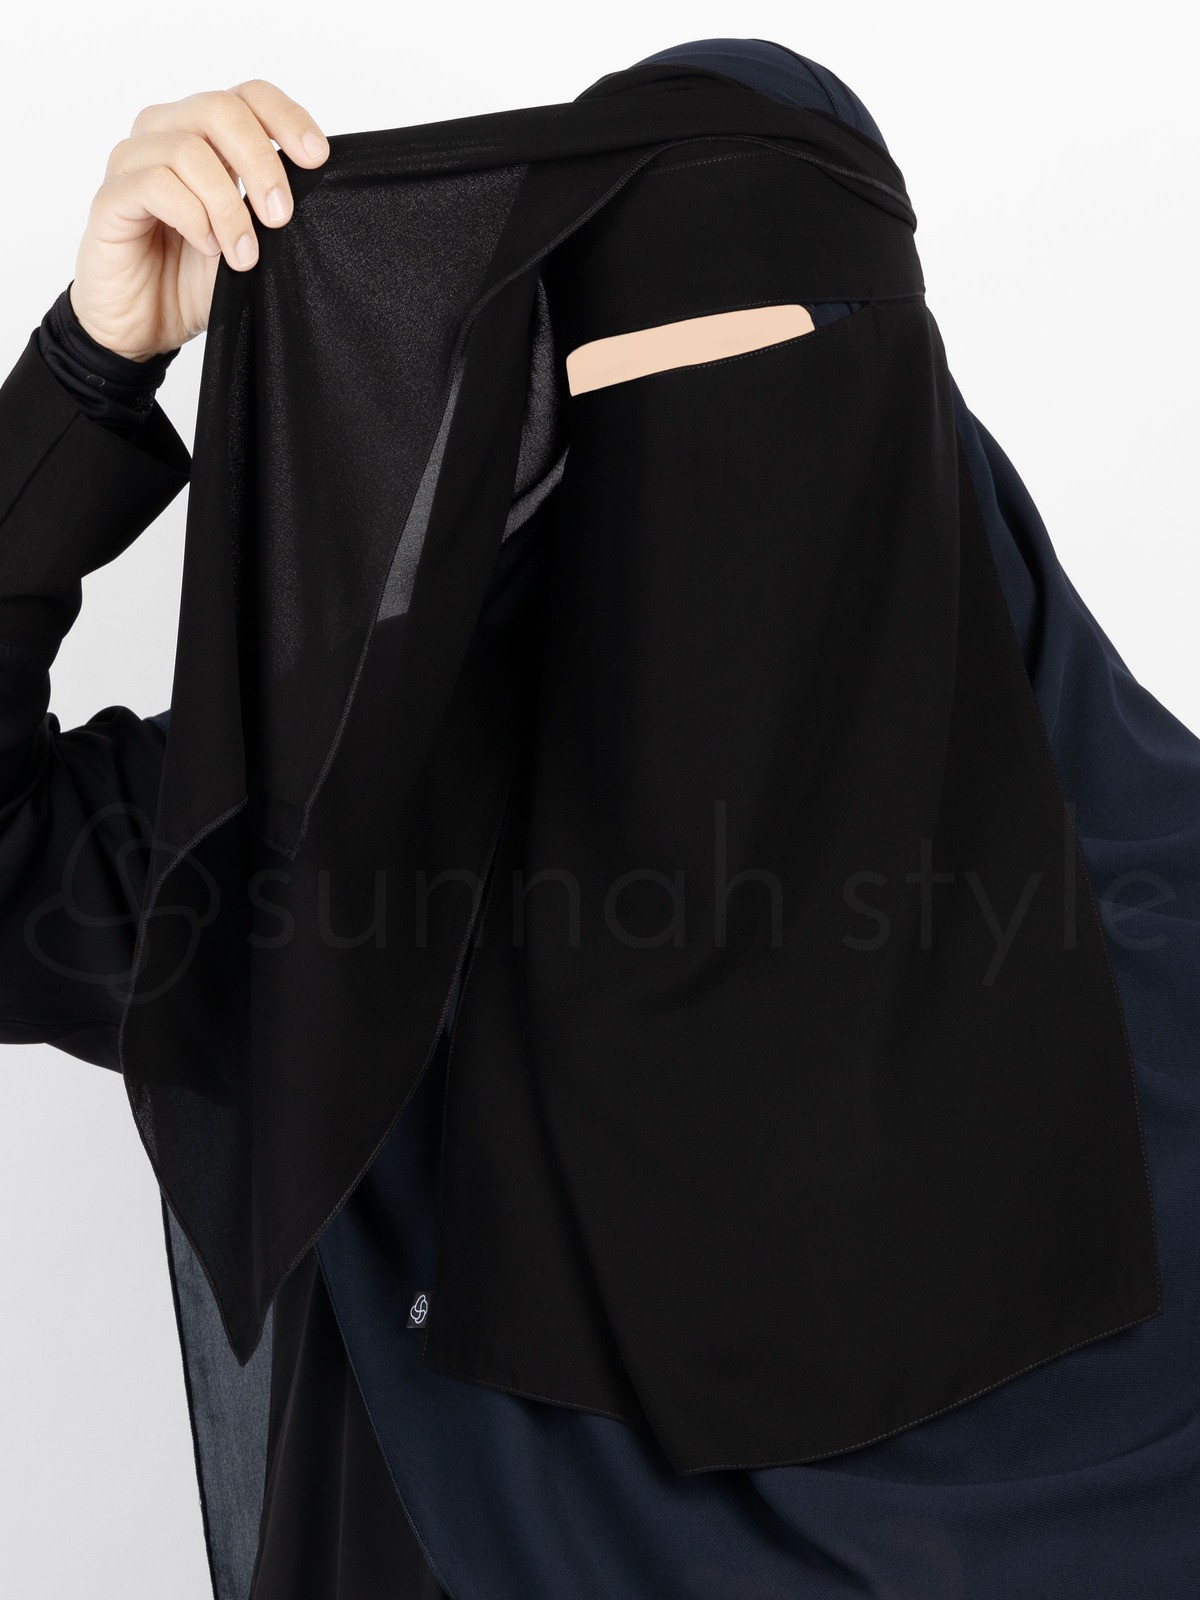 Sunnah Style - Two Layer Niqab (Burgundy)